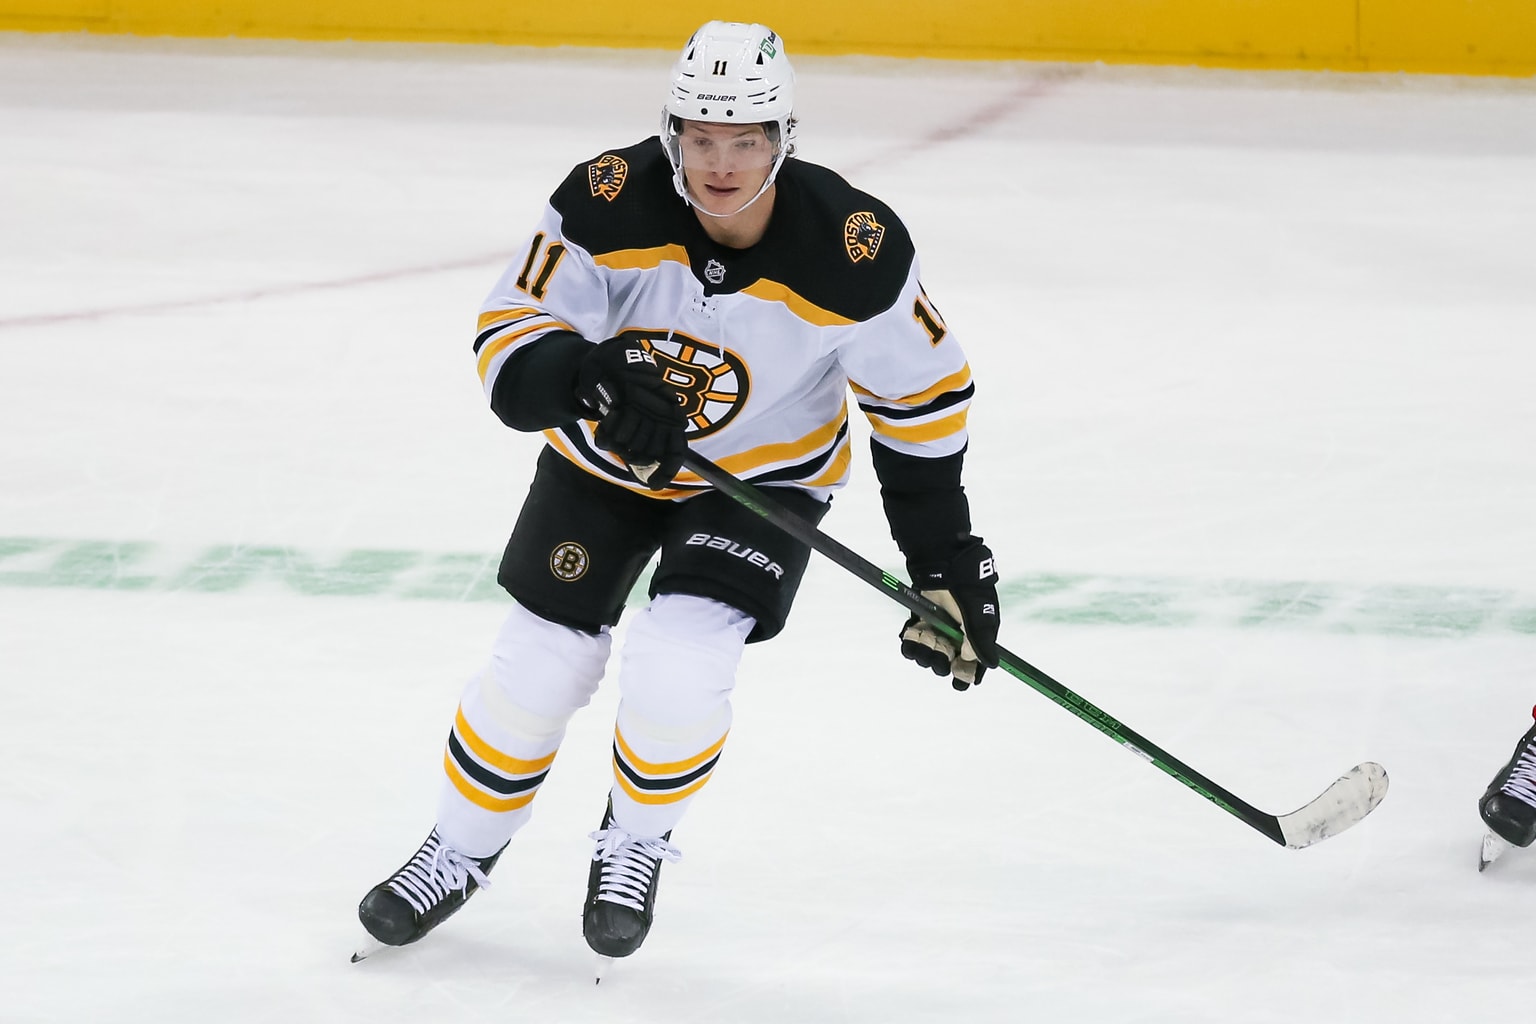 Bruins Journal: Frederic's debut special for Backes